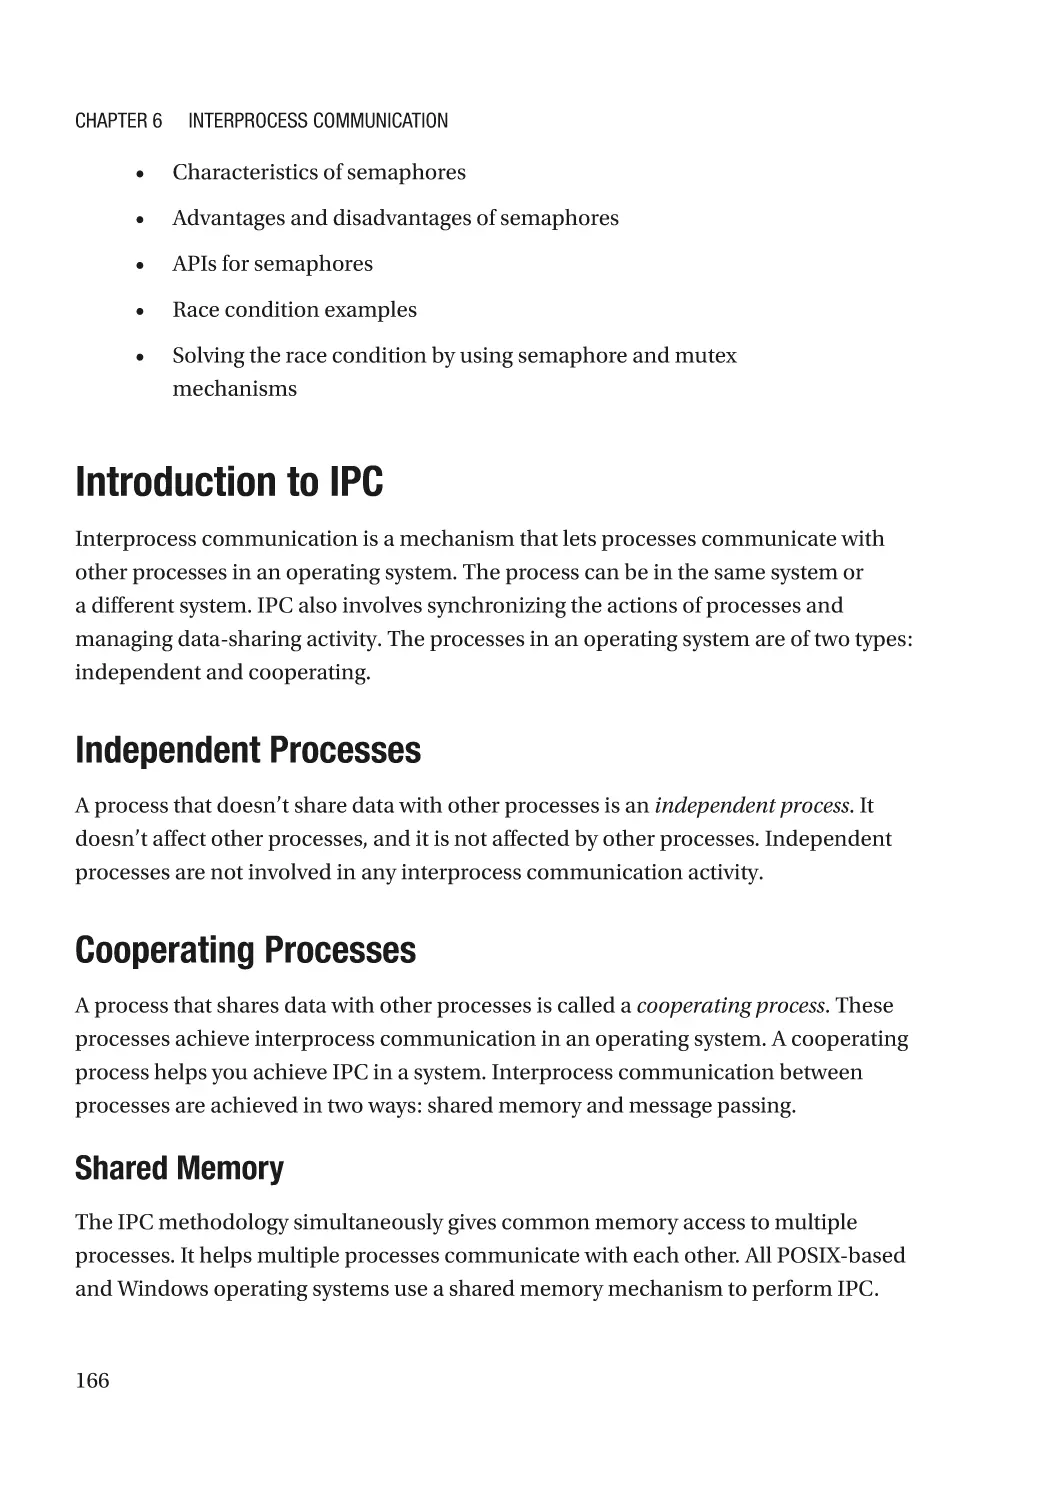 Introduction to IPC
Independent Processes
Cooperating Processes
Shared Memory